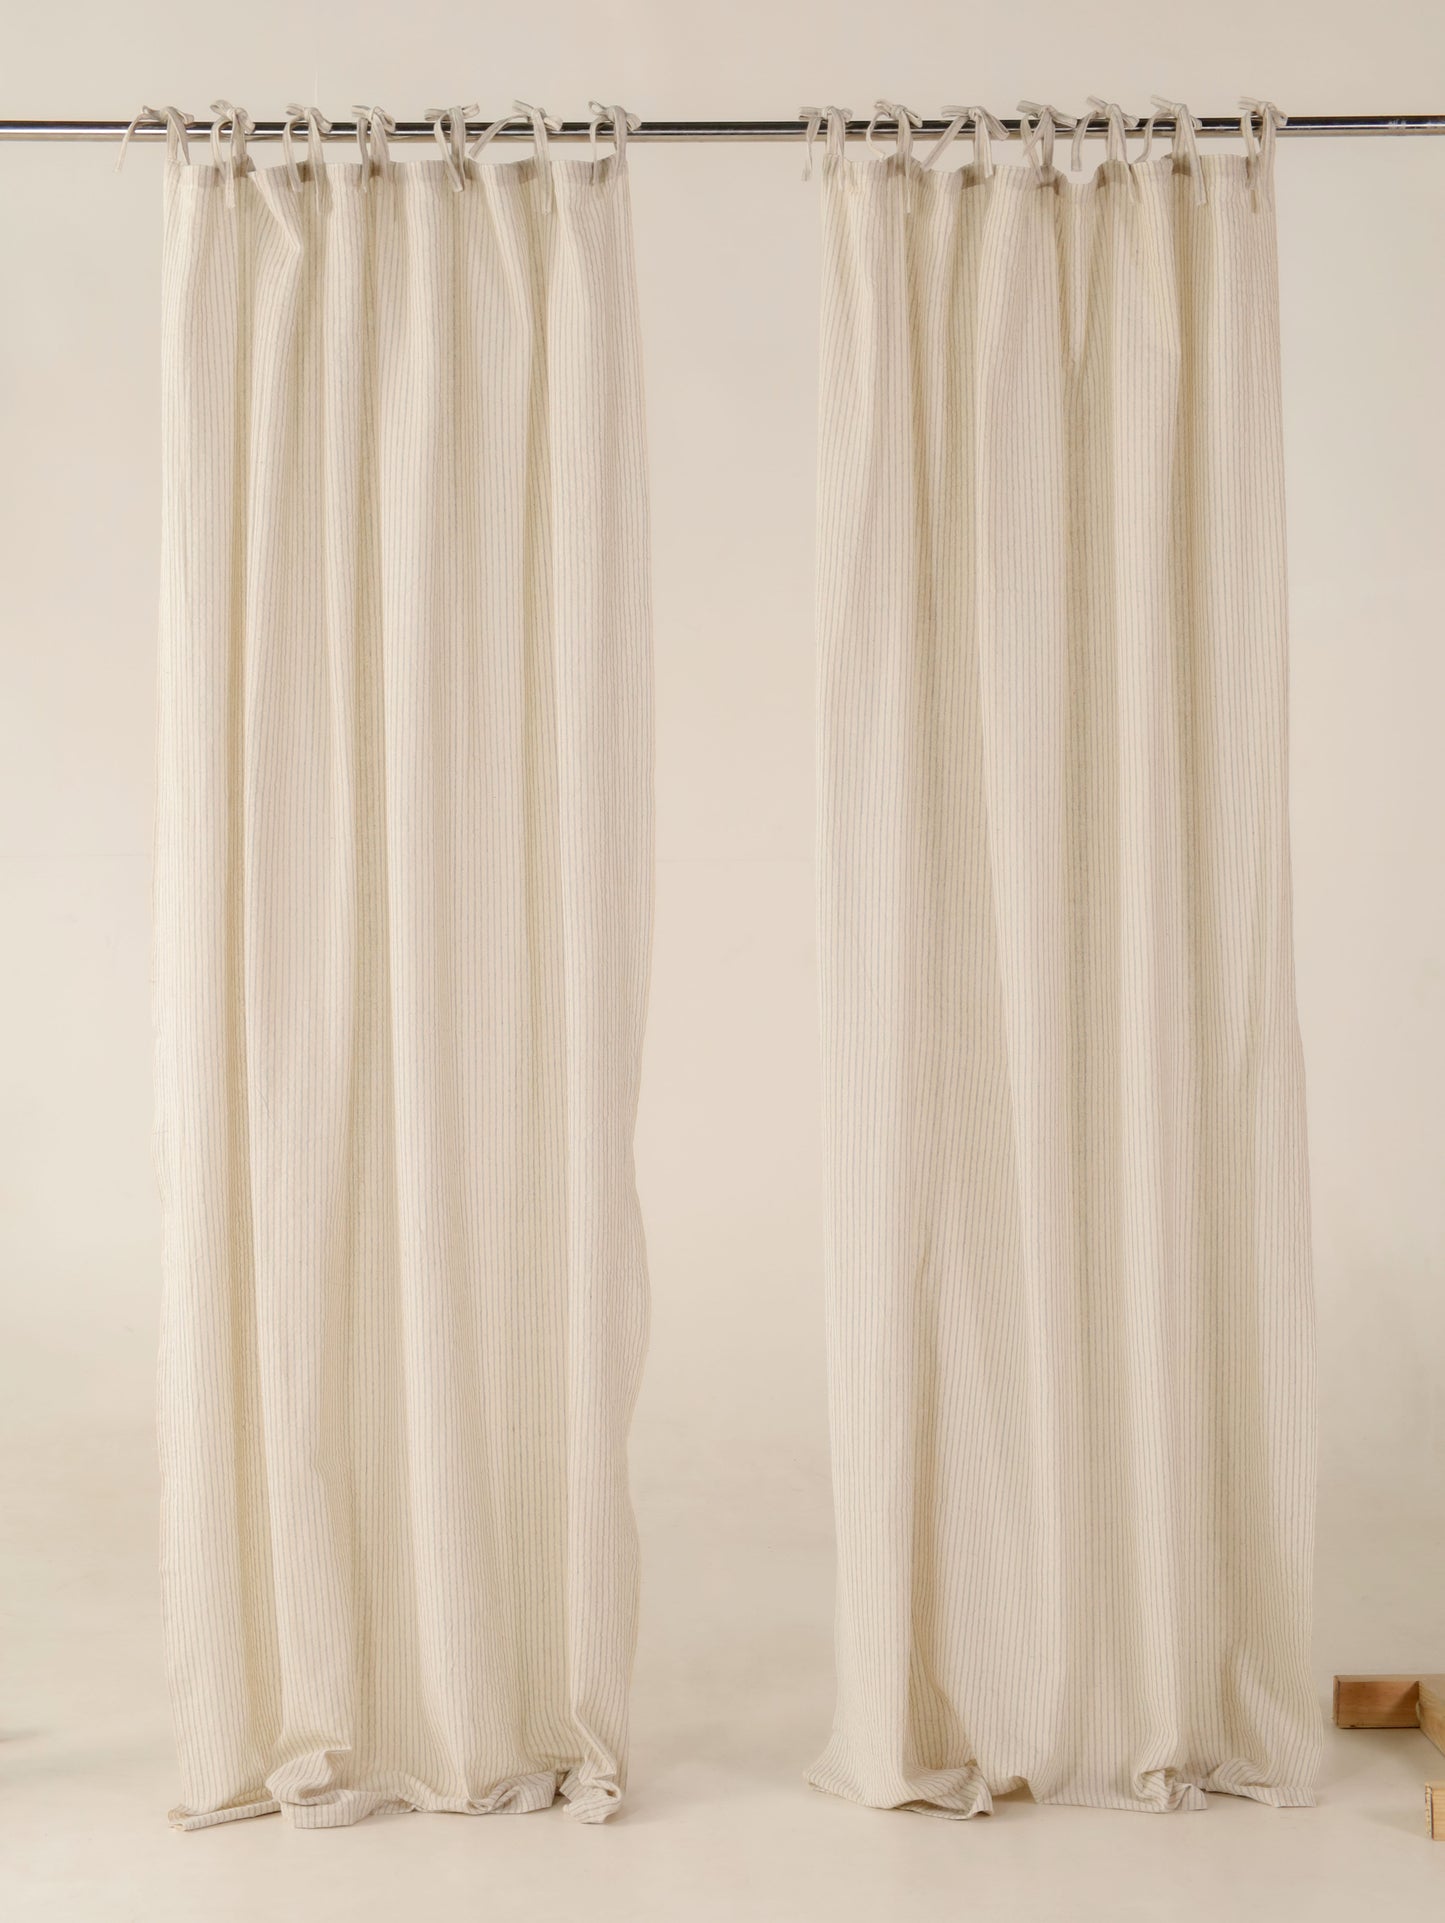 Linen Beige with White Stripes Curtains- 2 Panel set